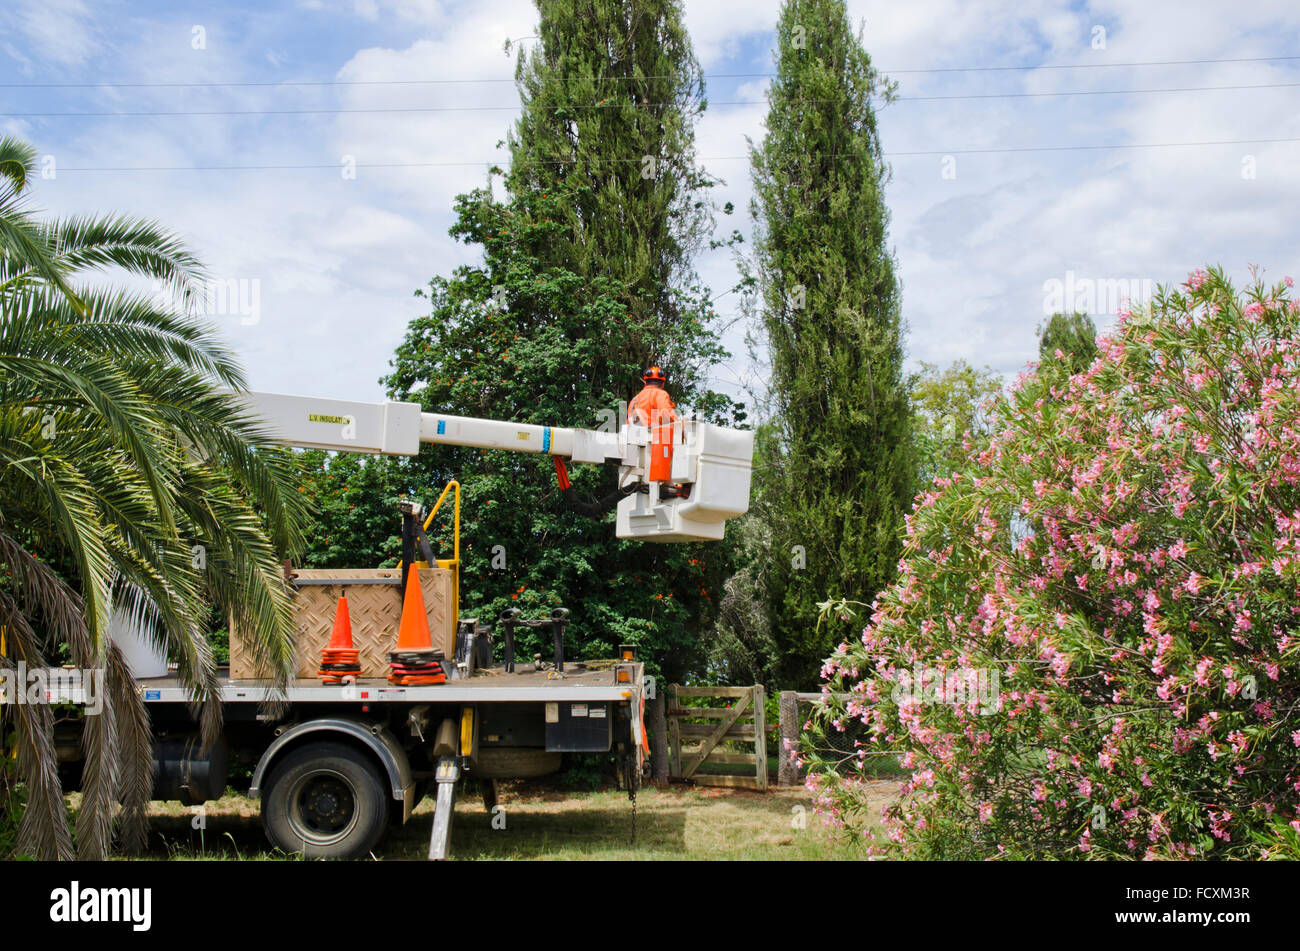 Worker with chain saw in a cherry picker about to prune pine trees that are too close to power lines. Stock Photo